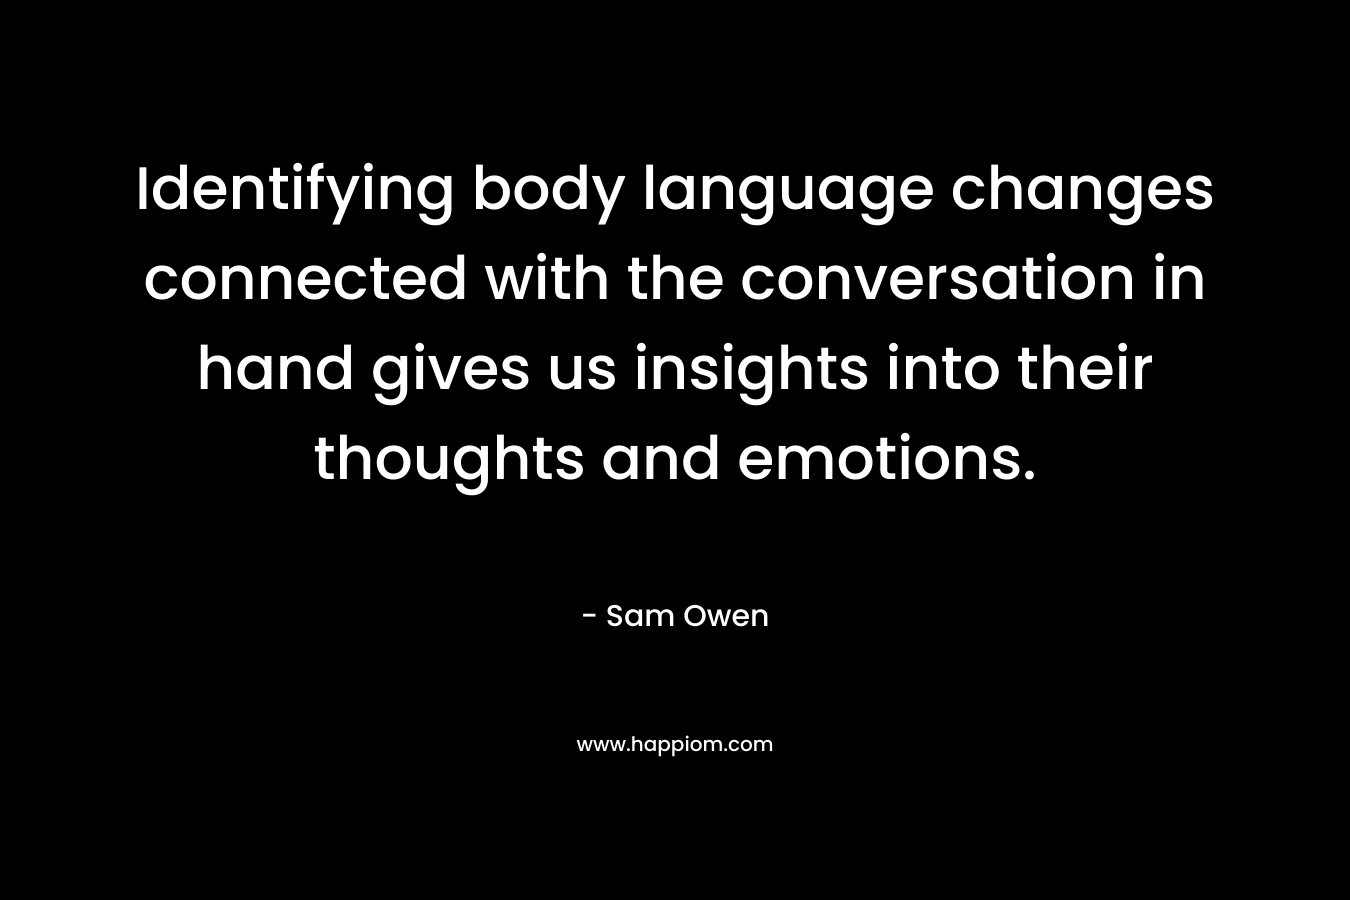 Identifying body language changes connected with the conversation in hand gives us insights into their thoughts and emotions.